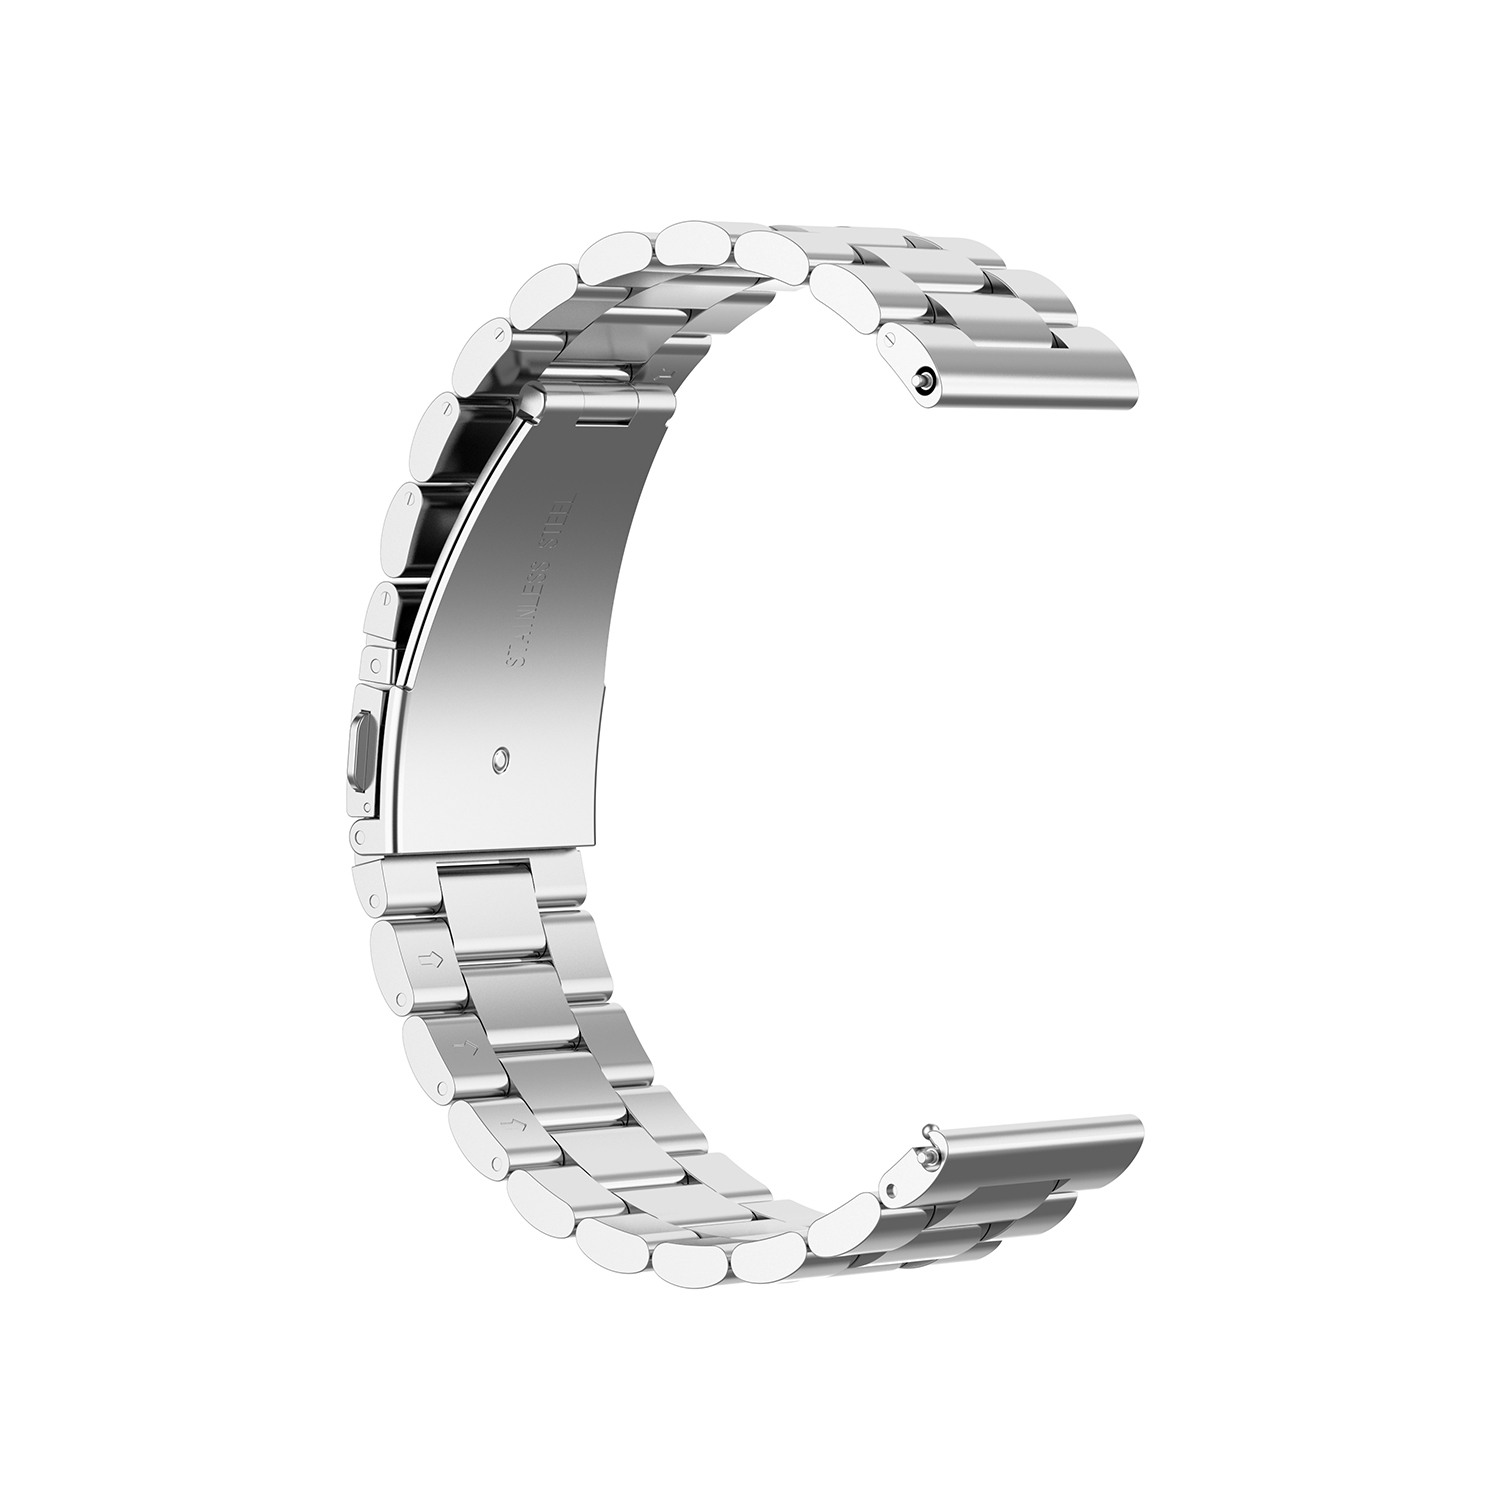 Bakeey-2022mm-Width-Universal-Bussiness-Stainless-Steel-Watch-Band-Strap-Replacement-for-Samsung-Gal-1734811-13